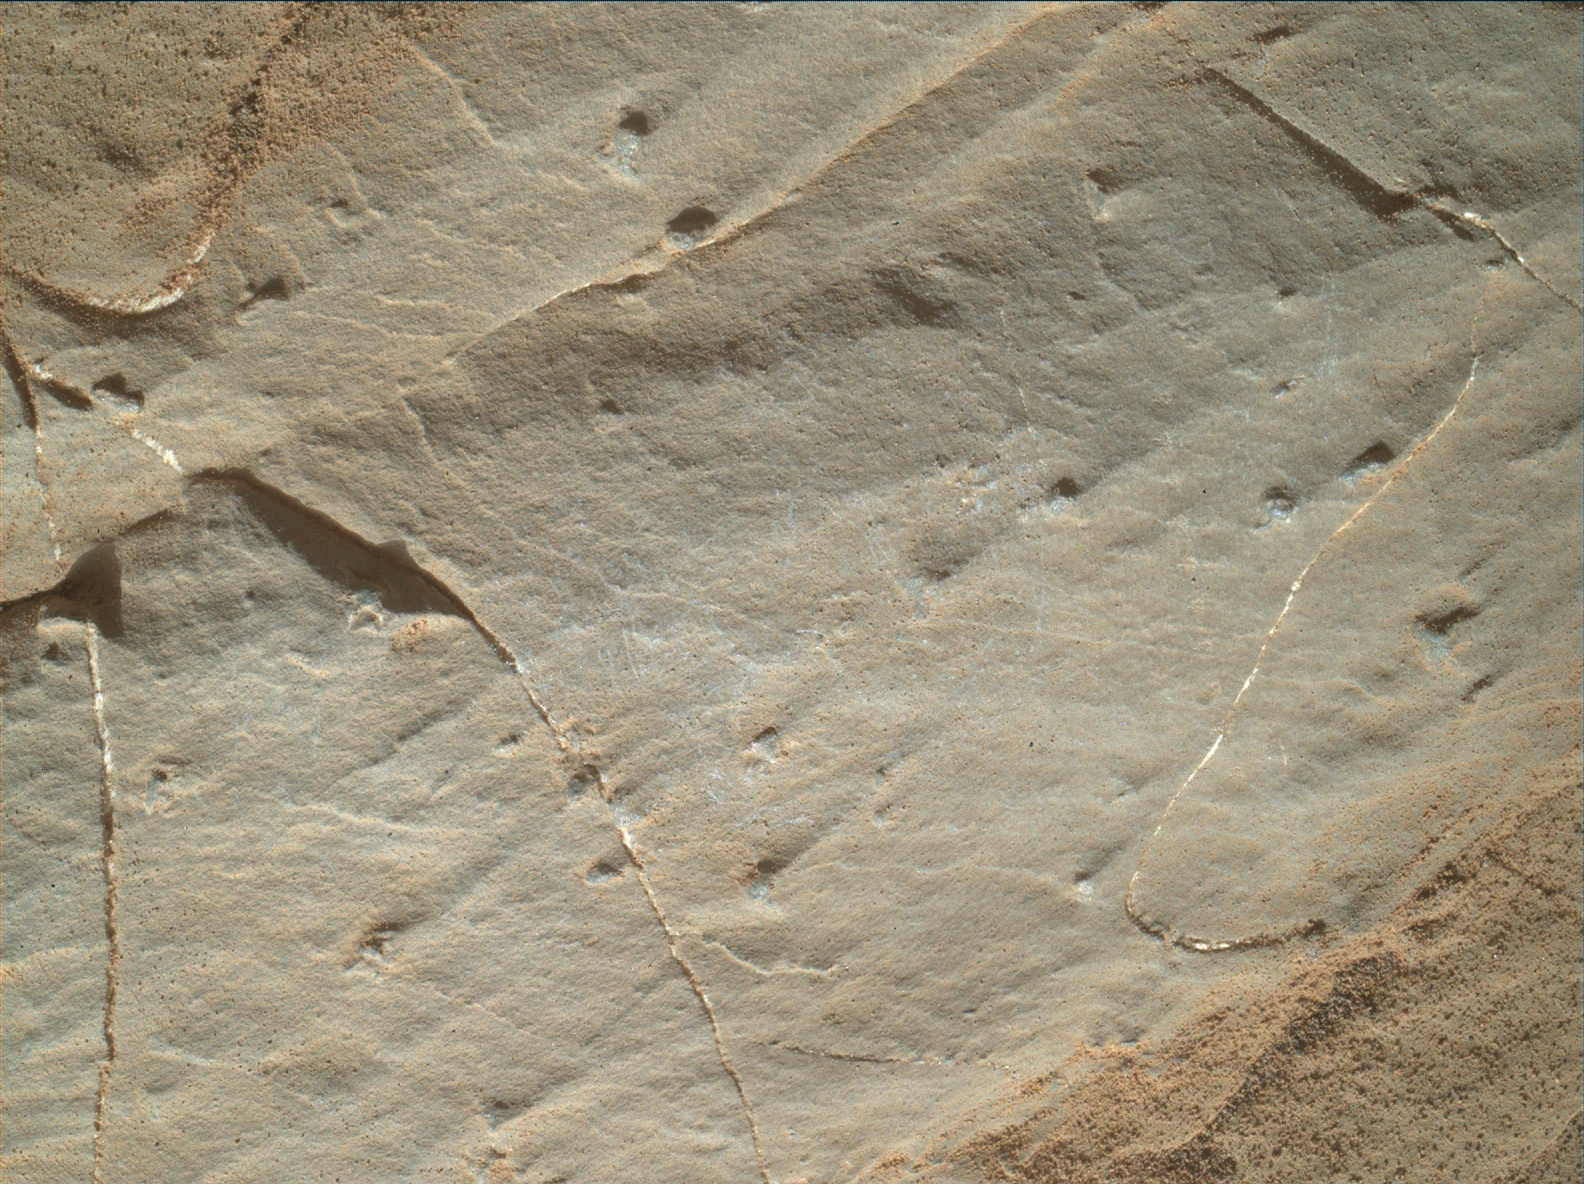 Nasa's Mars rover Curiosity acquired this image using its Mars Hand Lens Imager (MAHLI) on Sol 1905